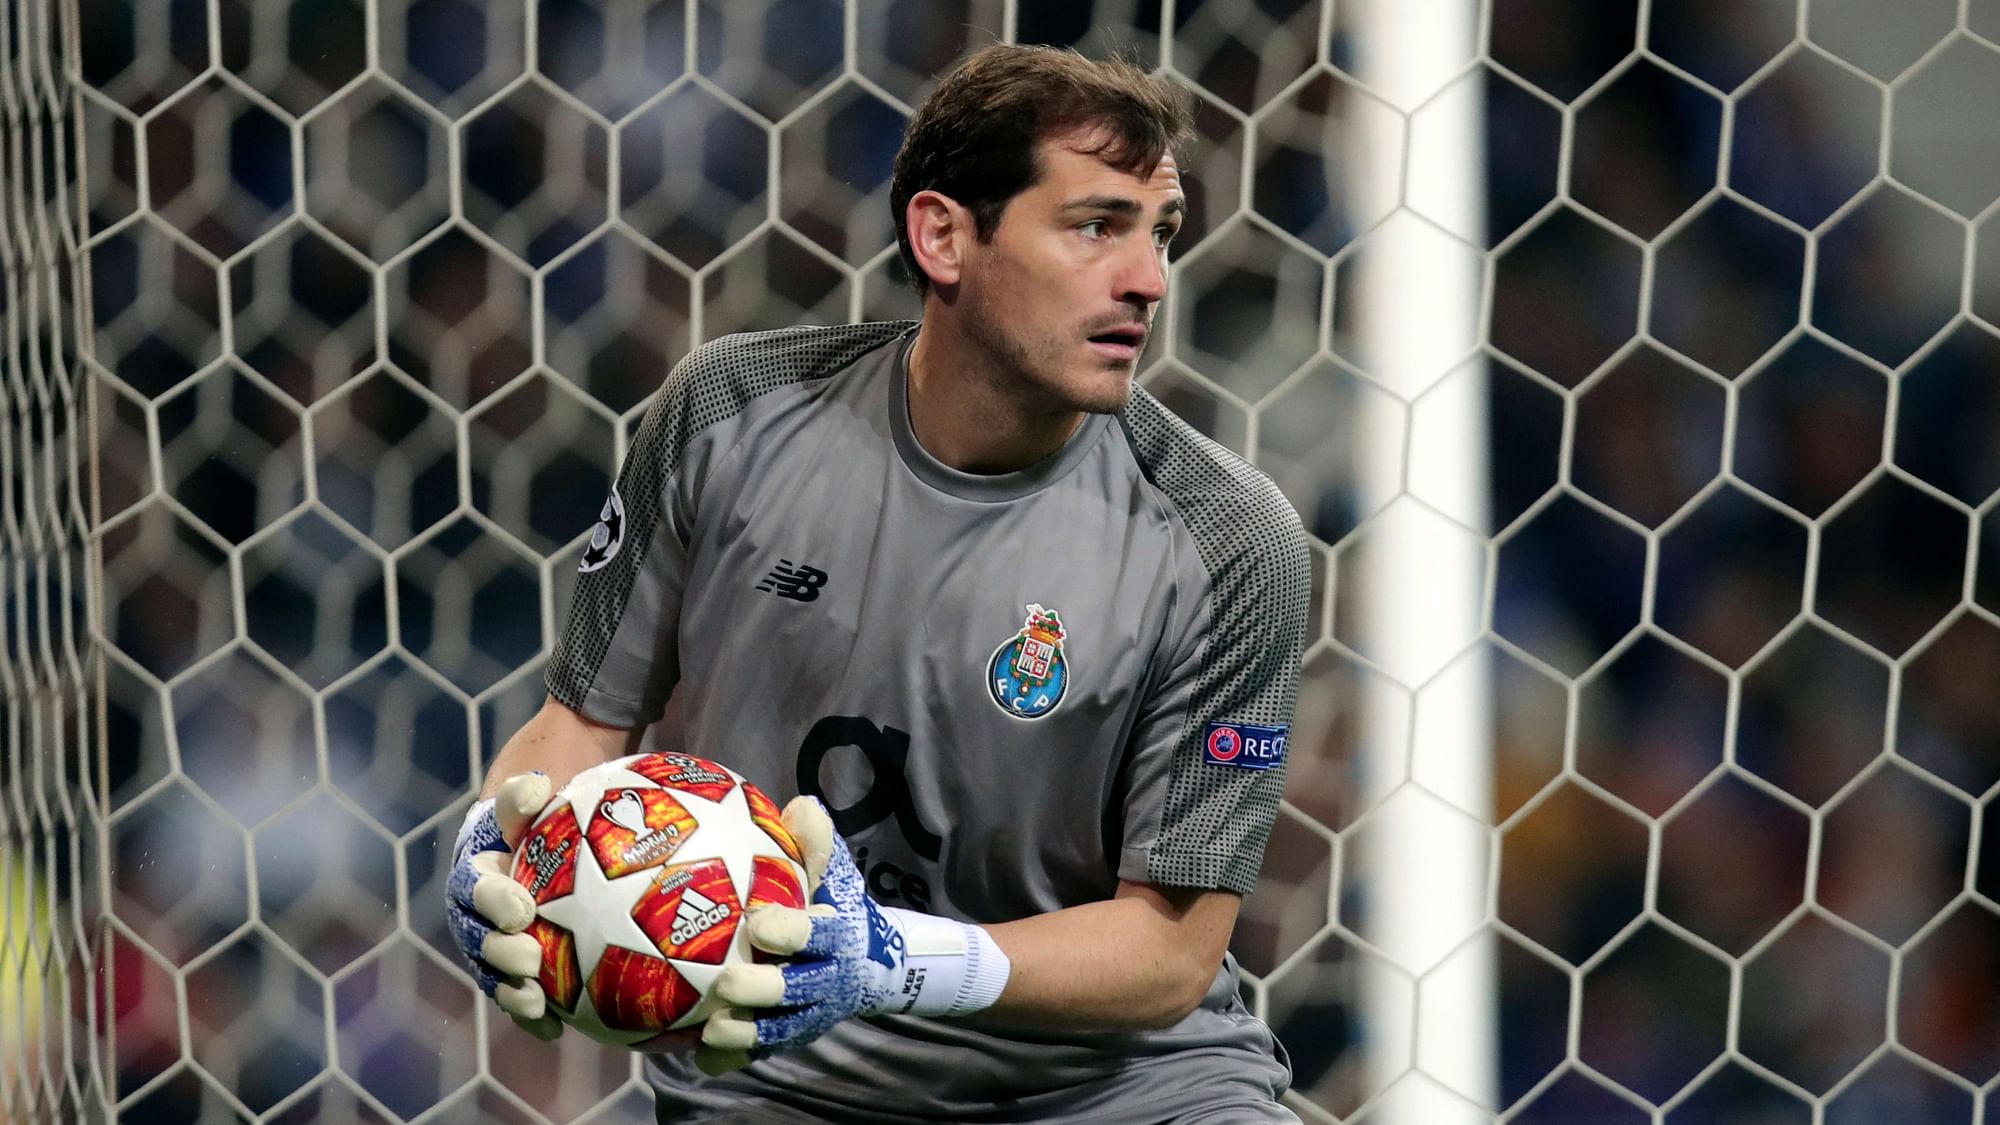 Iker Casillas had led Spain to World Cup glory in 2010.